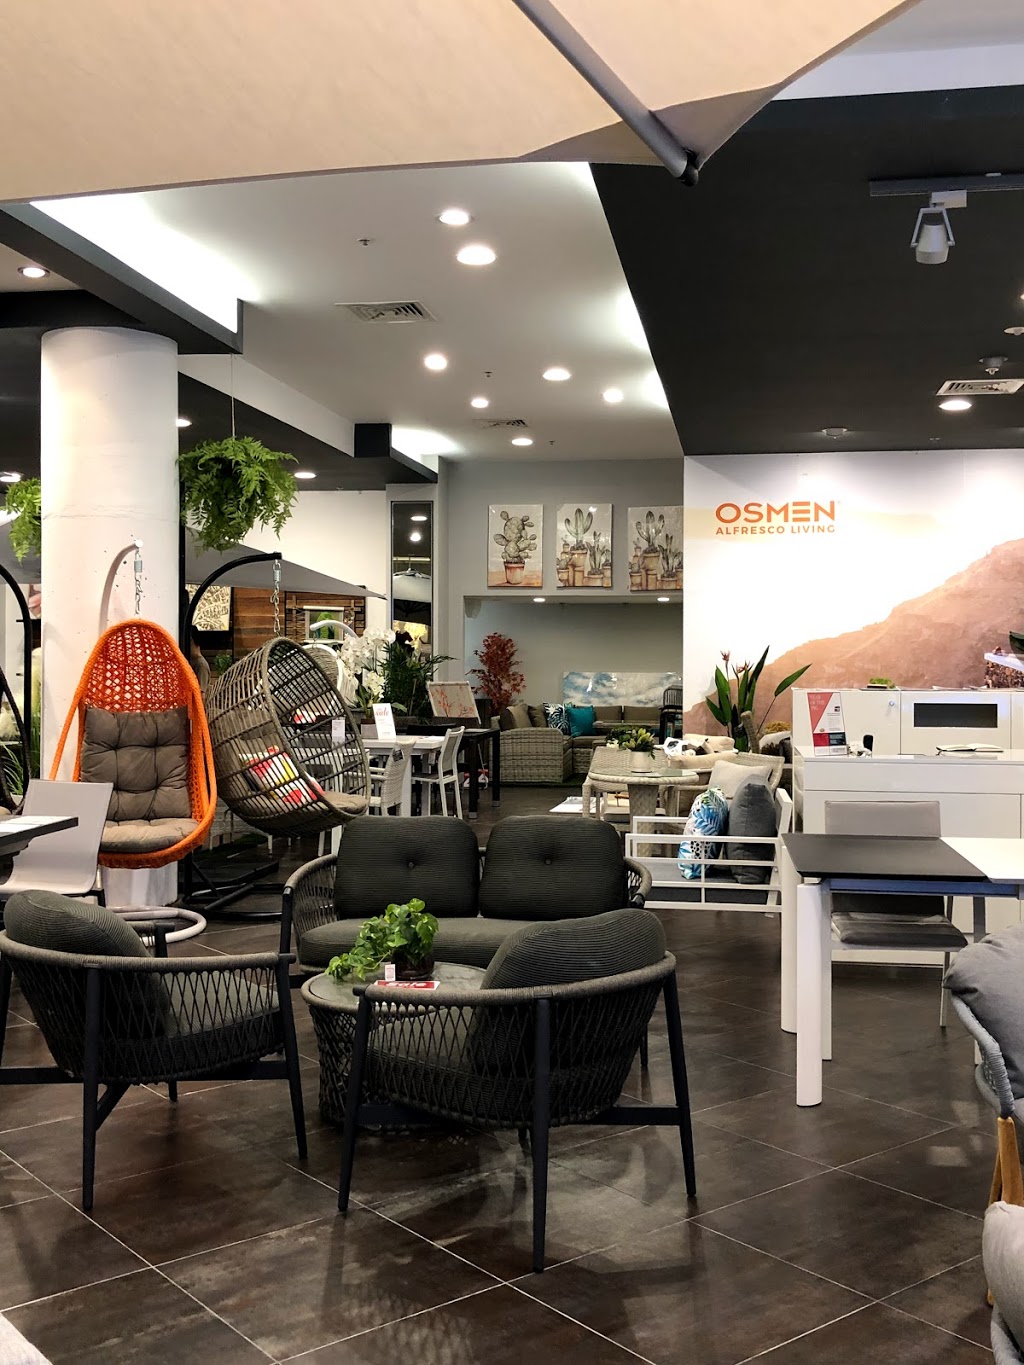 OSMEN Outdoor Furniture - Chatswood (Chase Sydney) Opening Hours